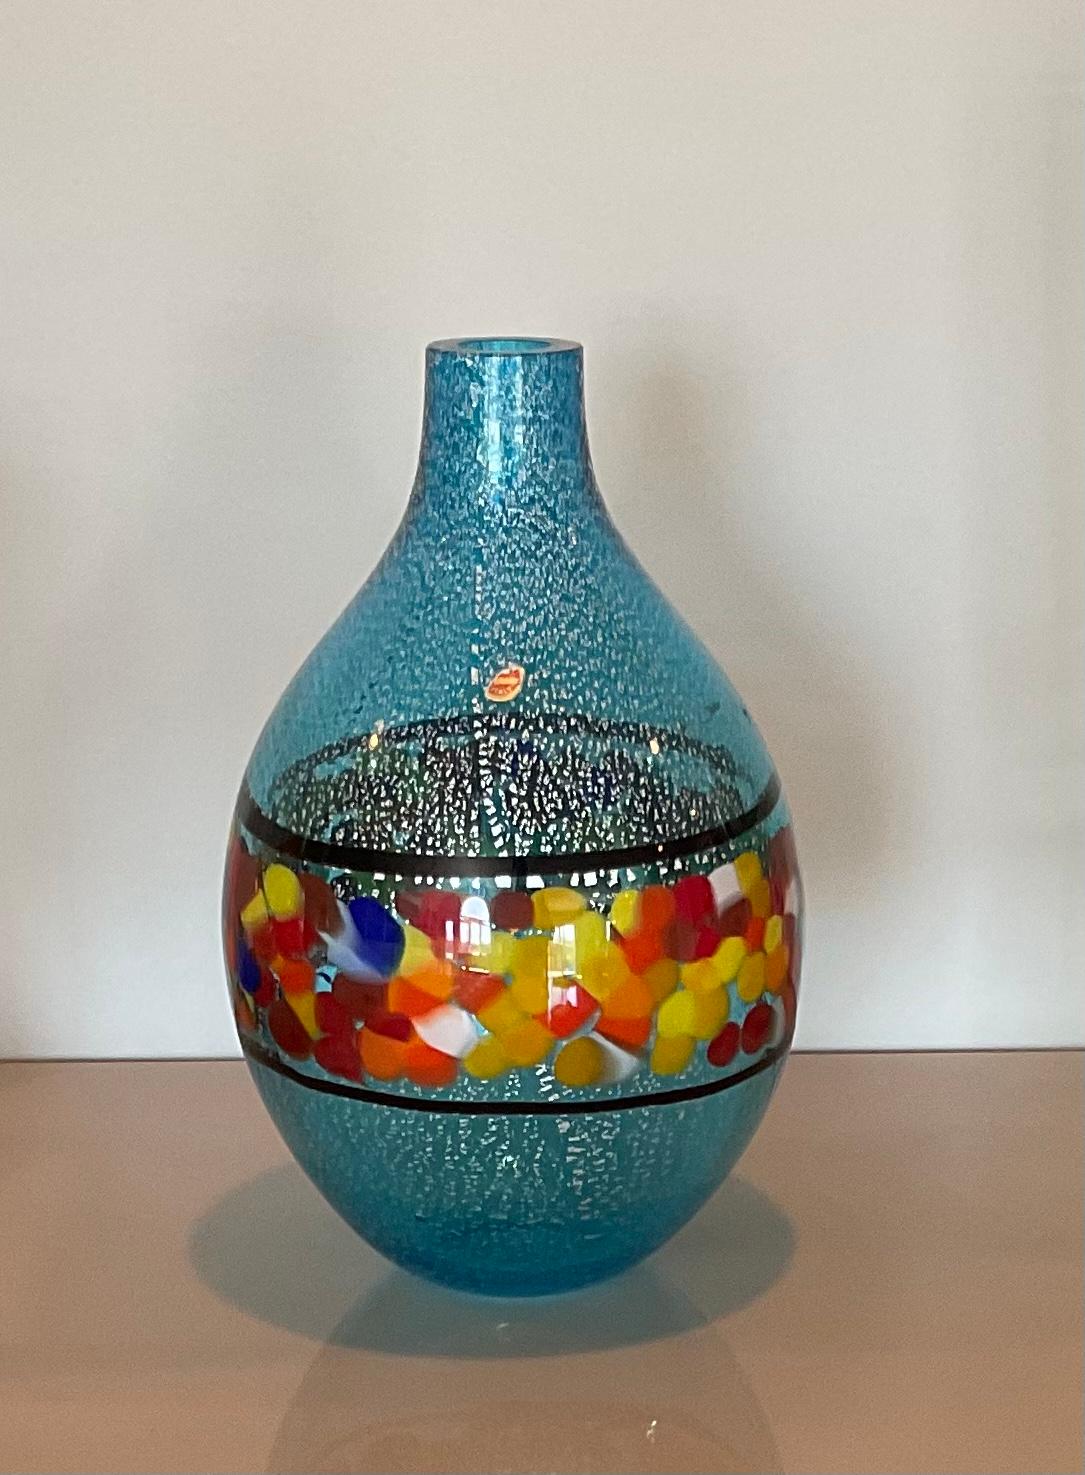 Large Sky blue with silver accent and Murrine decoration Murano glass studio Art glass vase. Very high quality.